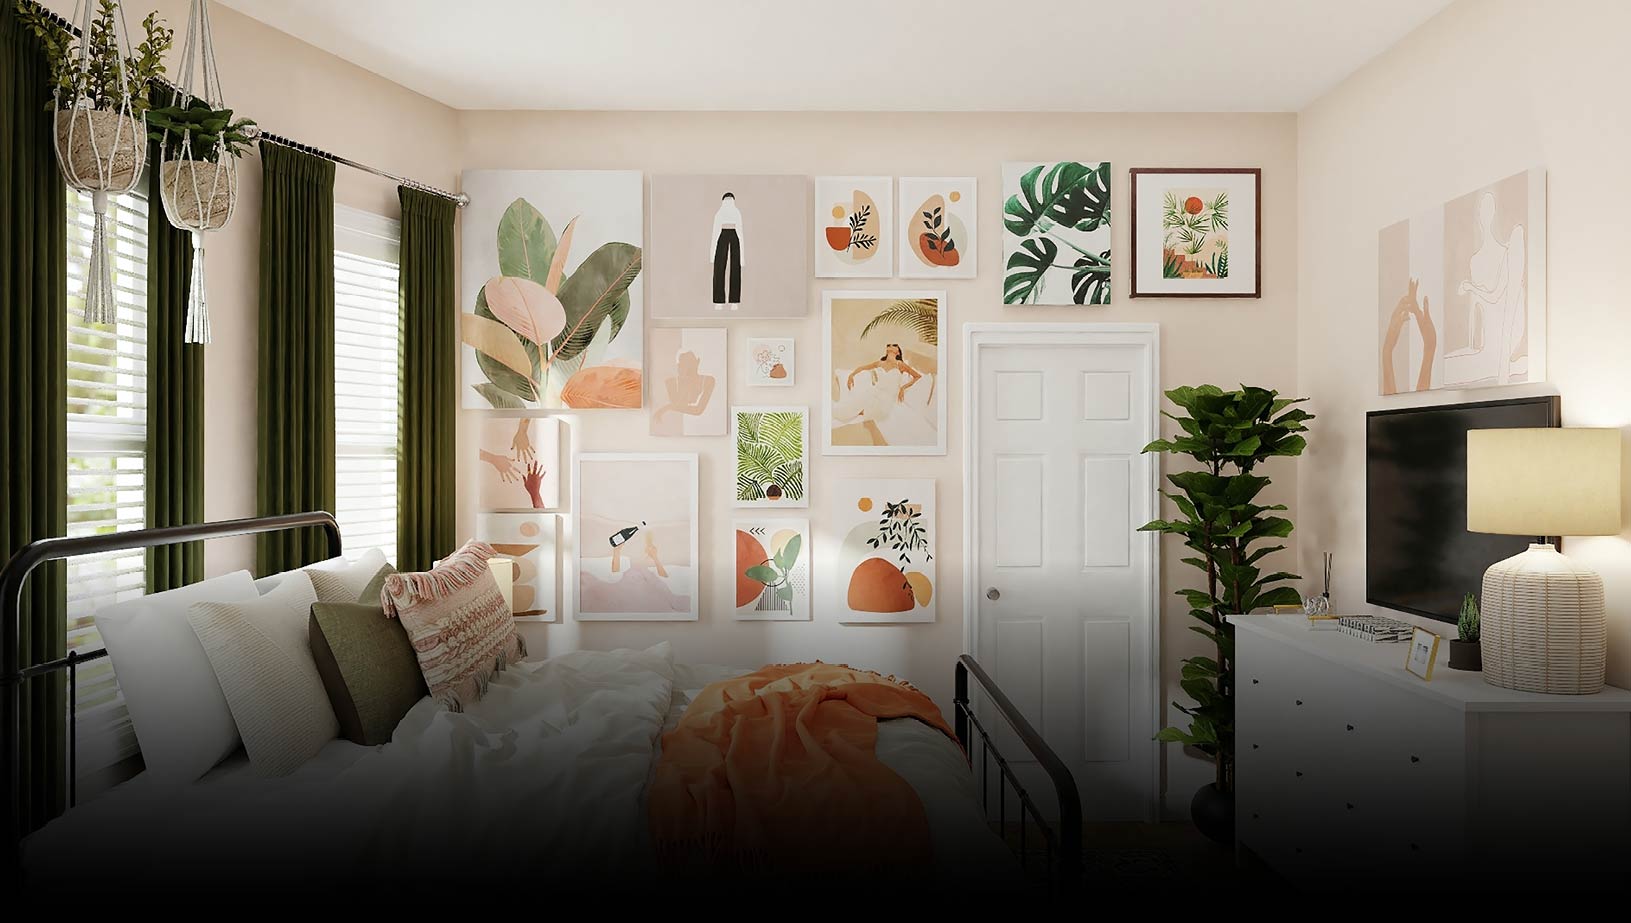 Decorated dorm room with various paintings on the wall